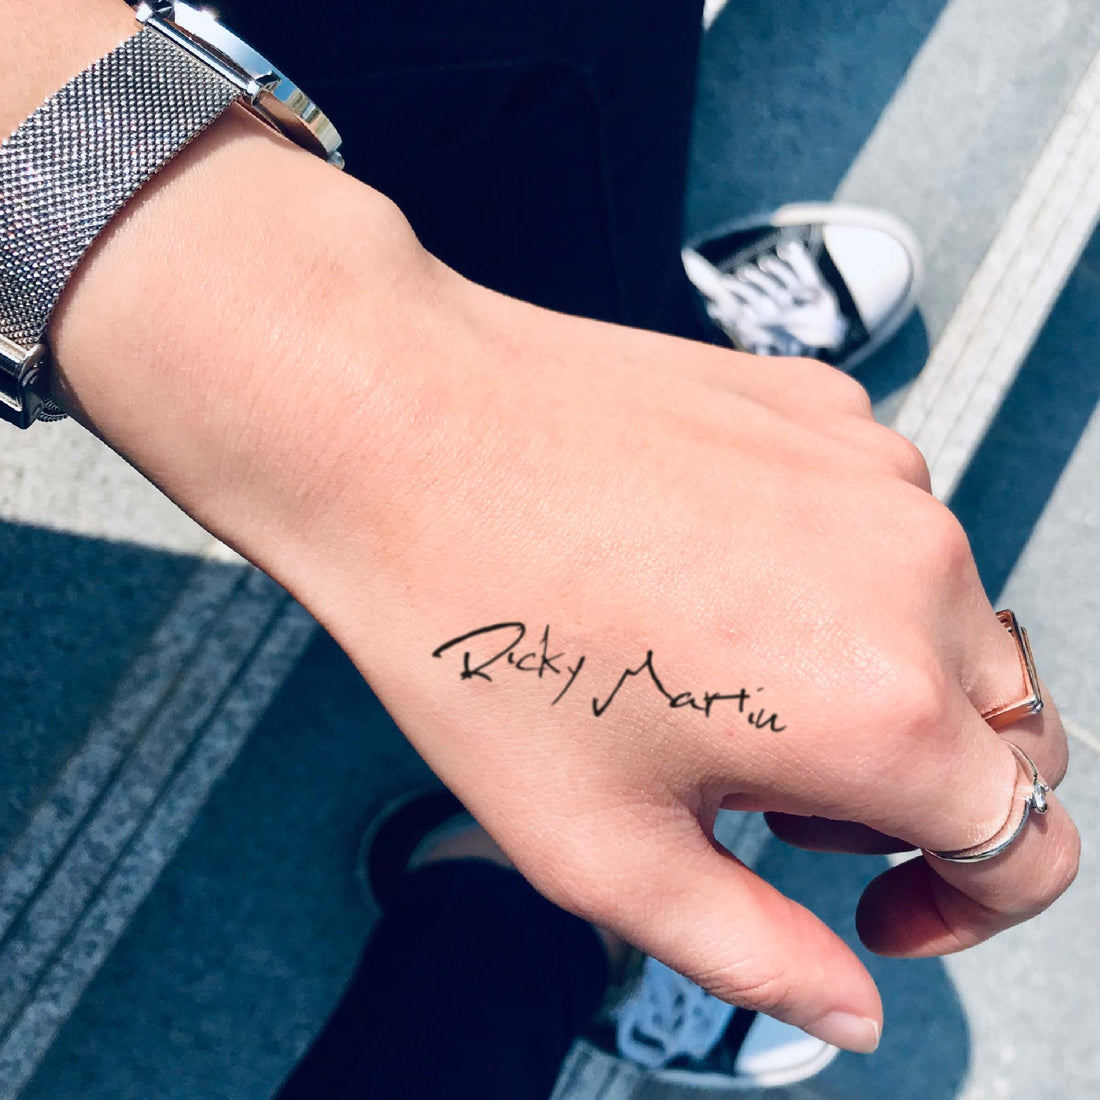 Ricky Martin custom temporary tattoo sticker design idea inspiration meanings removal arm wrist hand words font name signature calligraphy lyrics tour concert outfits merch accessory gift souvenir costumes wear dress up code